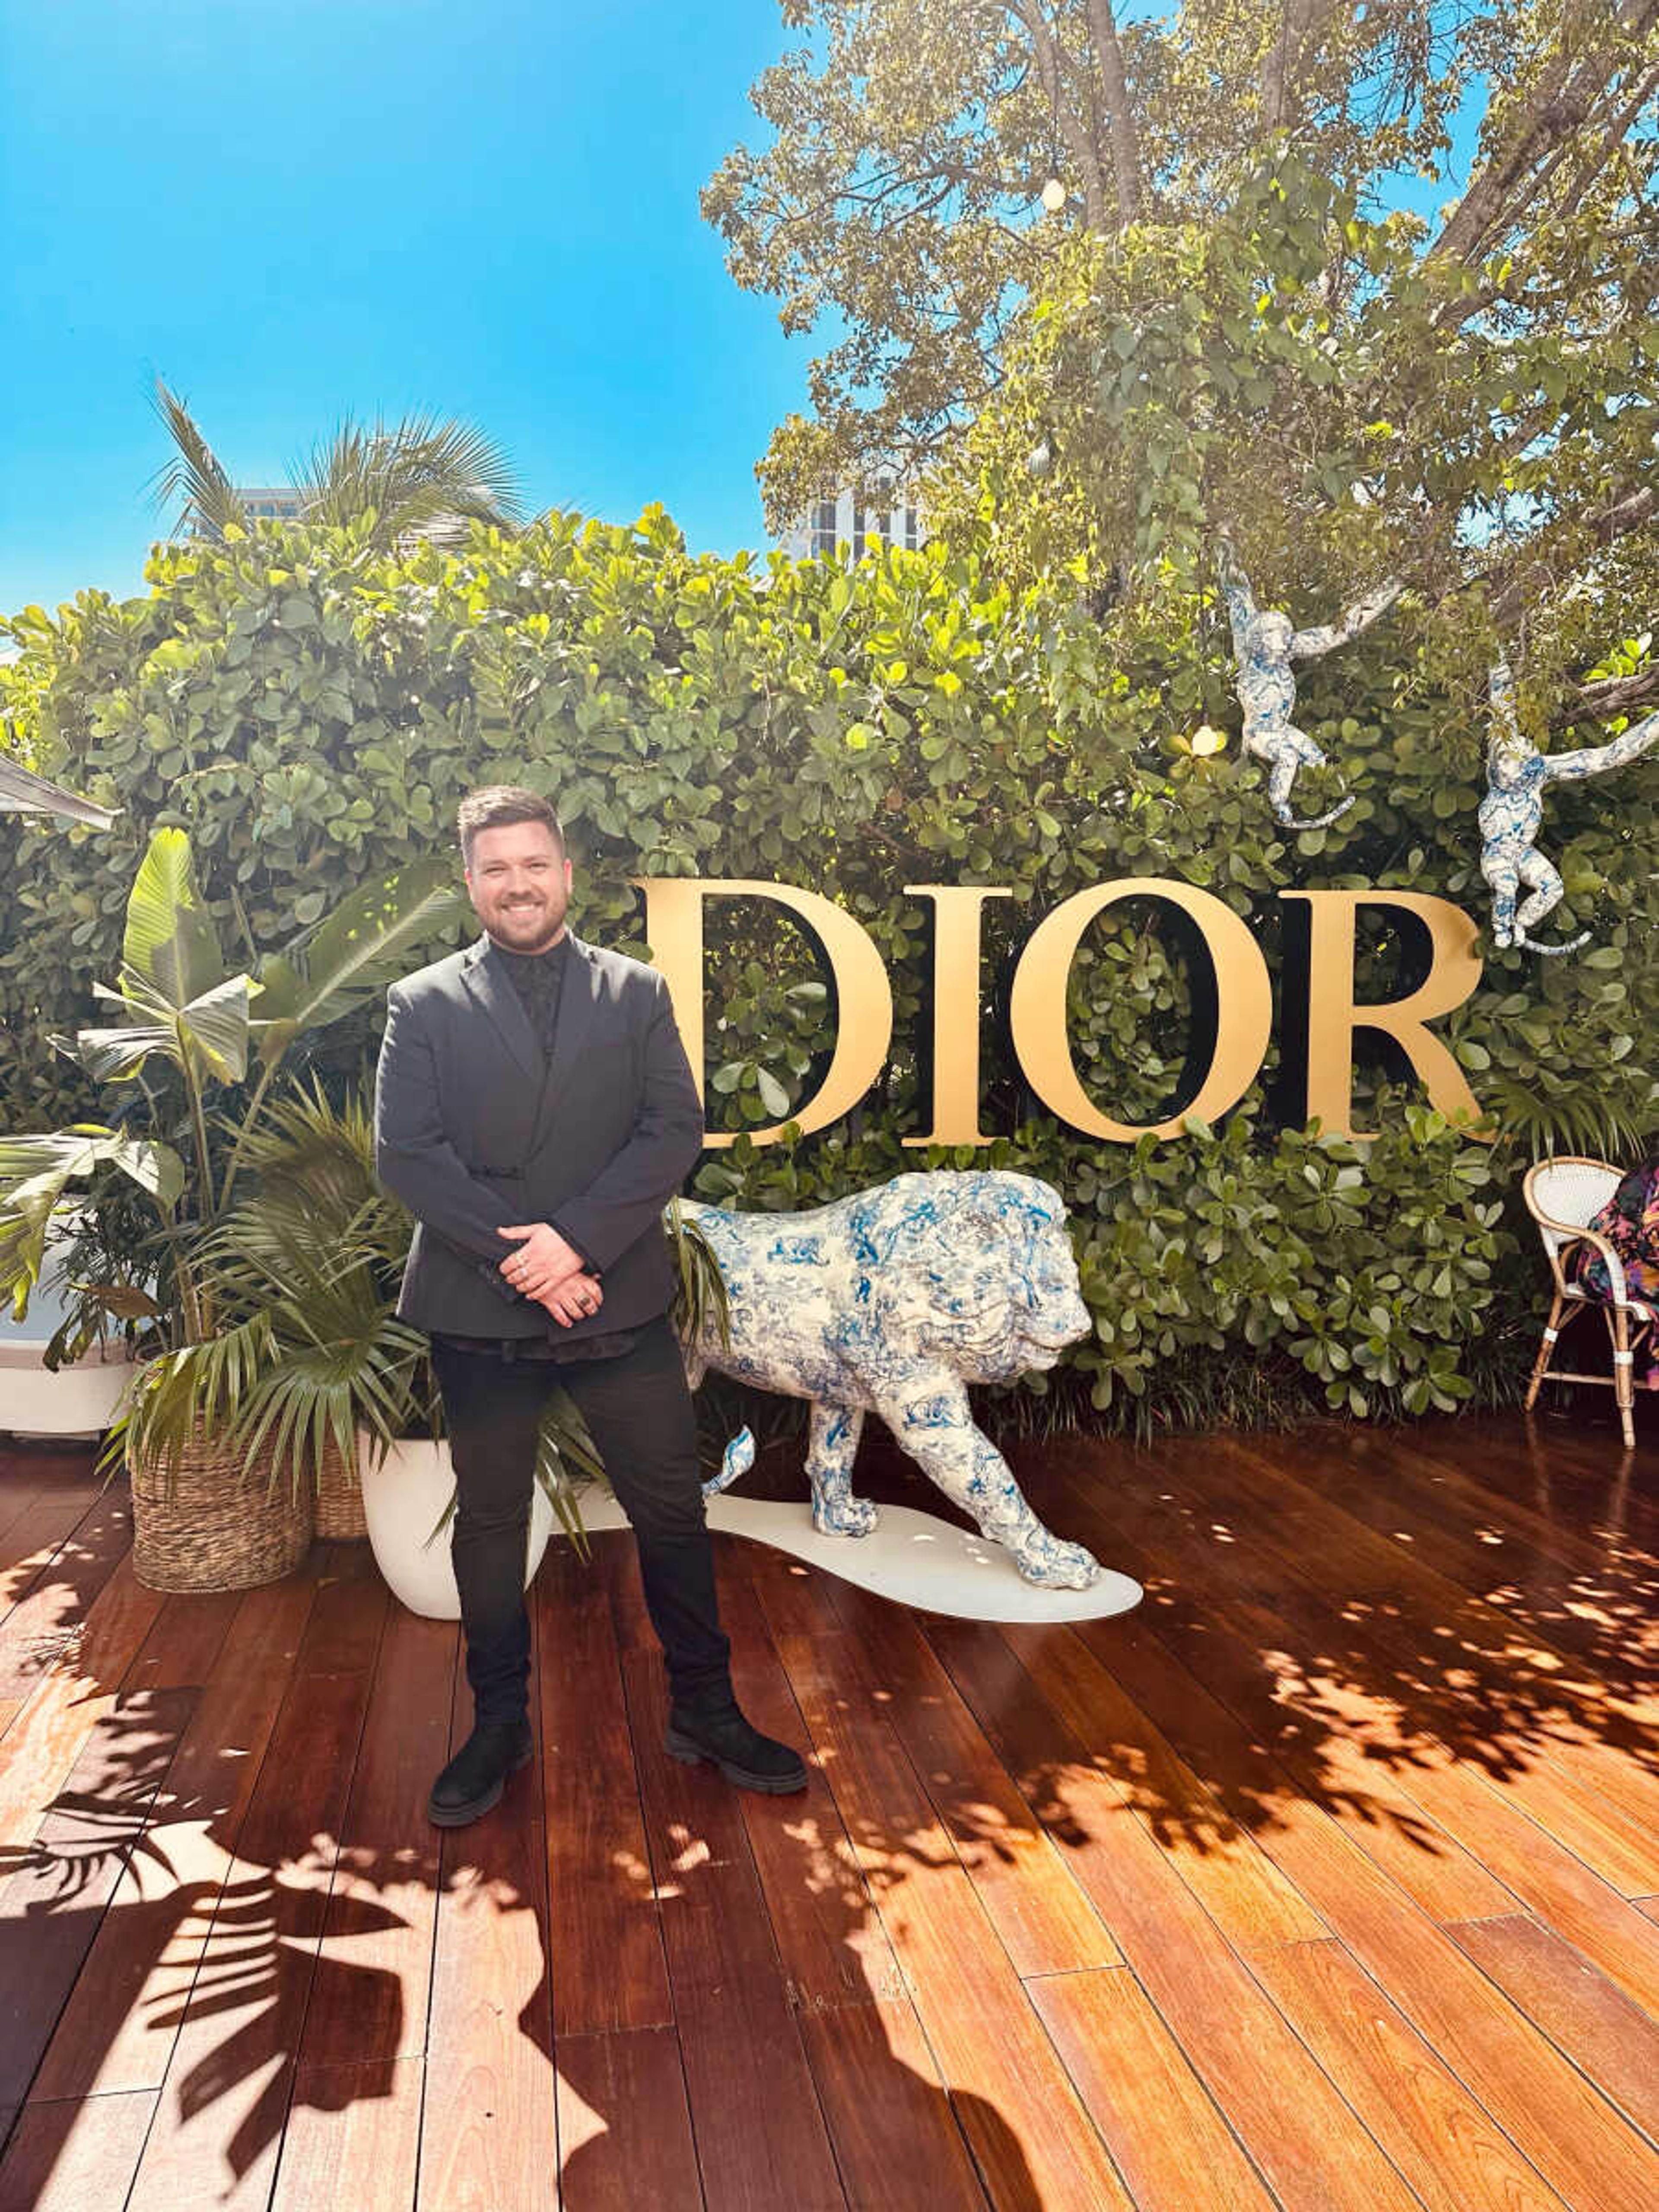 SEMO alum Jory Rapps is standing at the Dior Cafe in Miami, Florida. Rapps works as a Senior Manager Training for fine jewelry and timepieces at Dior in New York City.